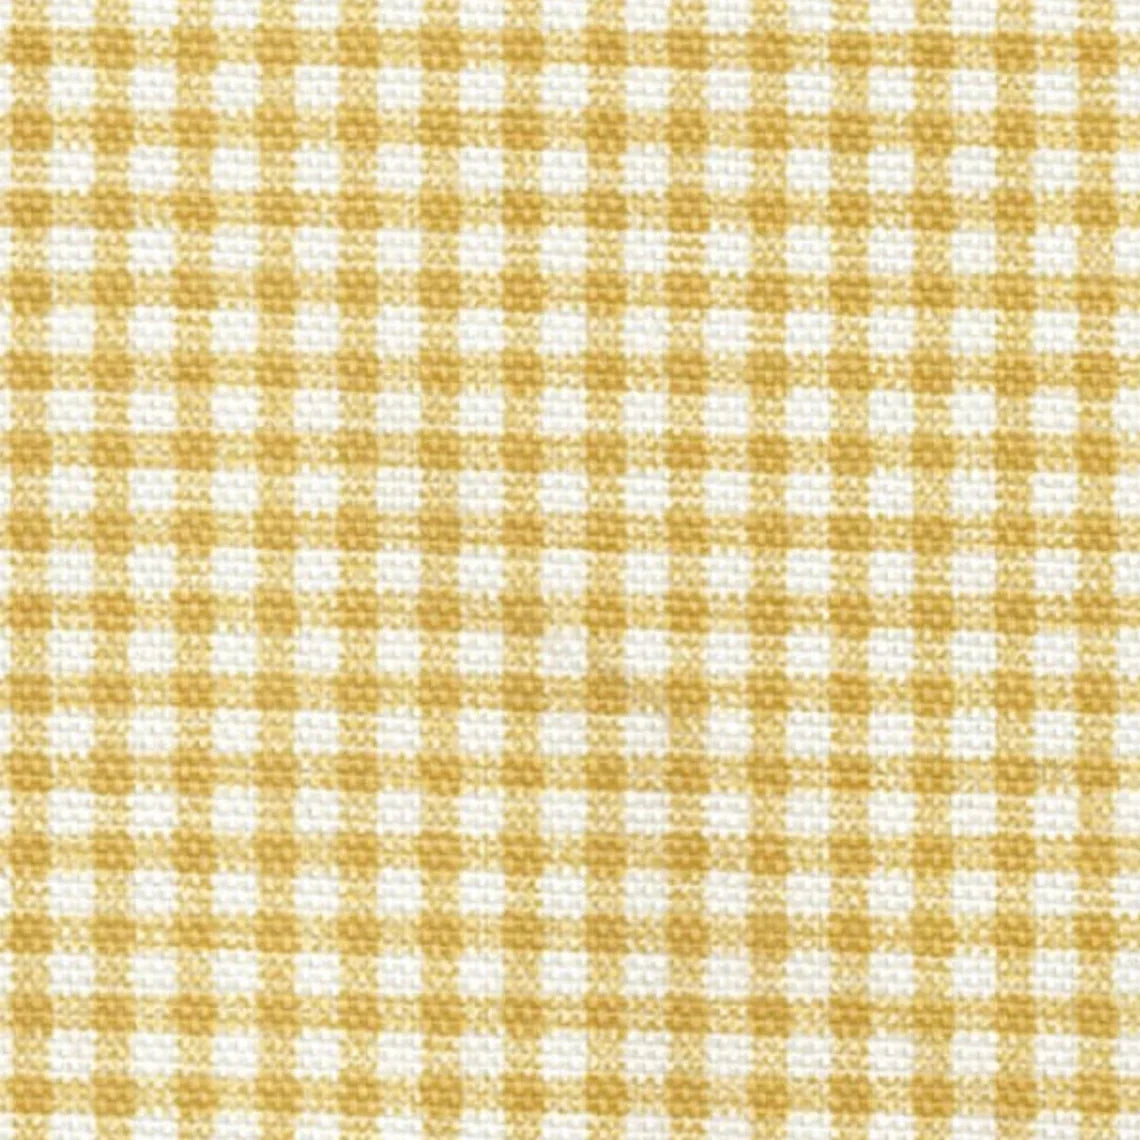 tailored bedskirt in farmhouse barley yellow gold gingham check